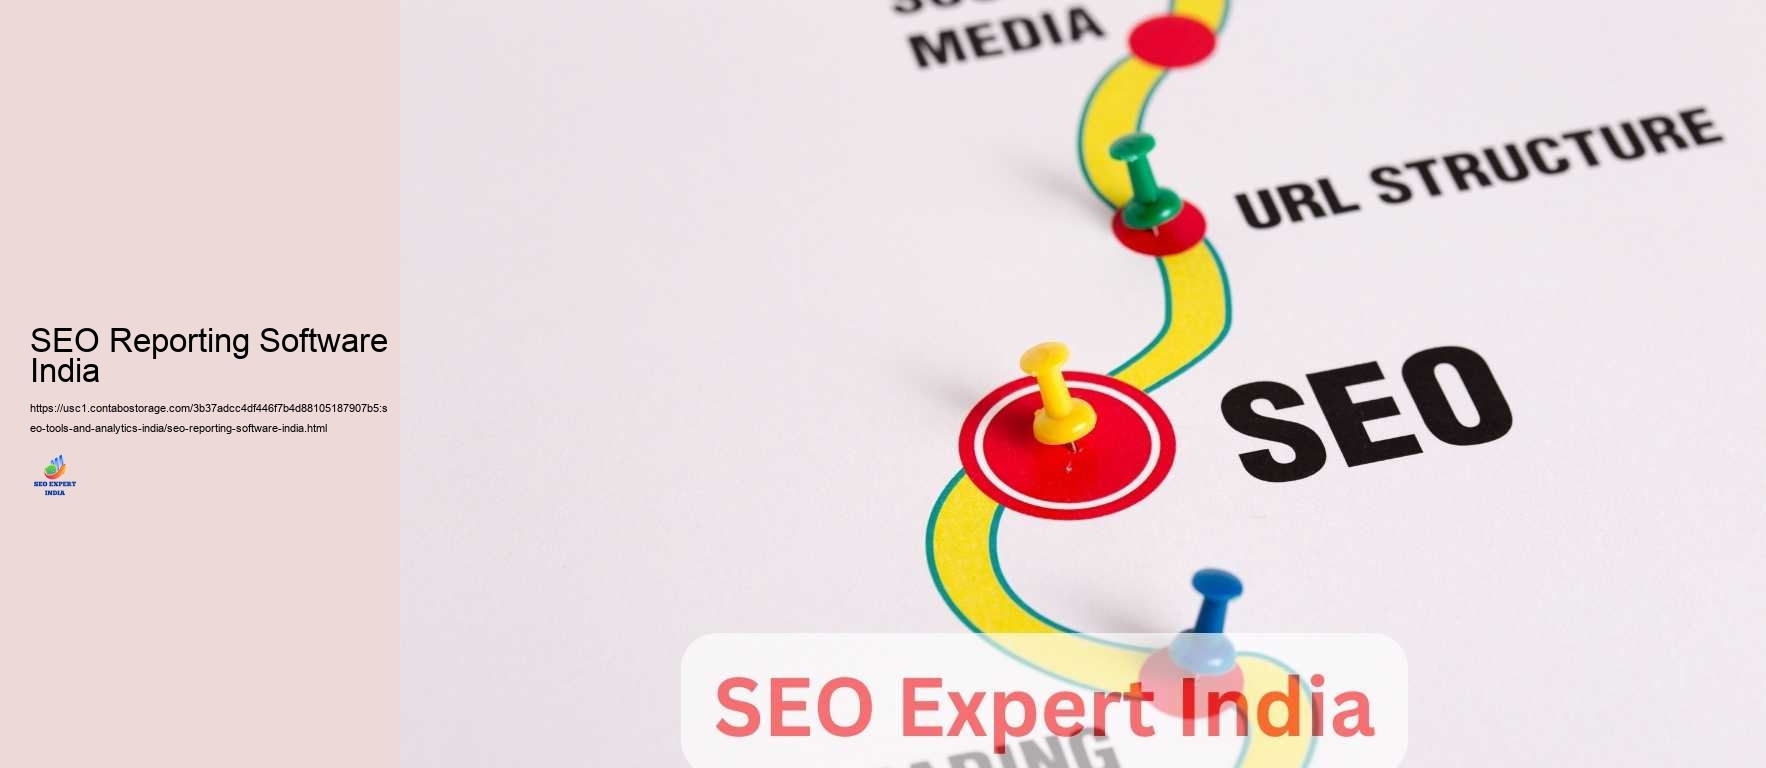 SEO Reporting Software India